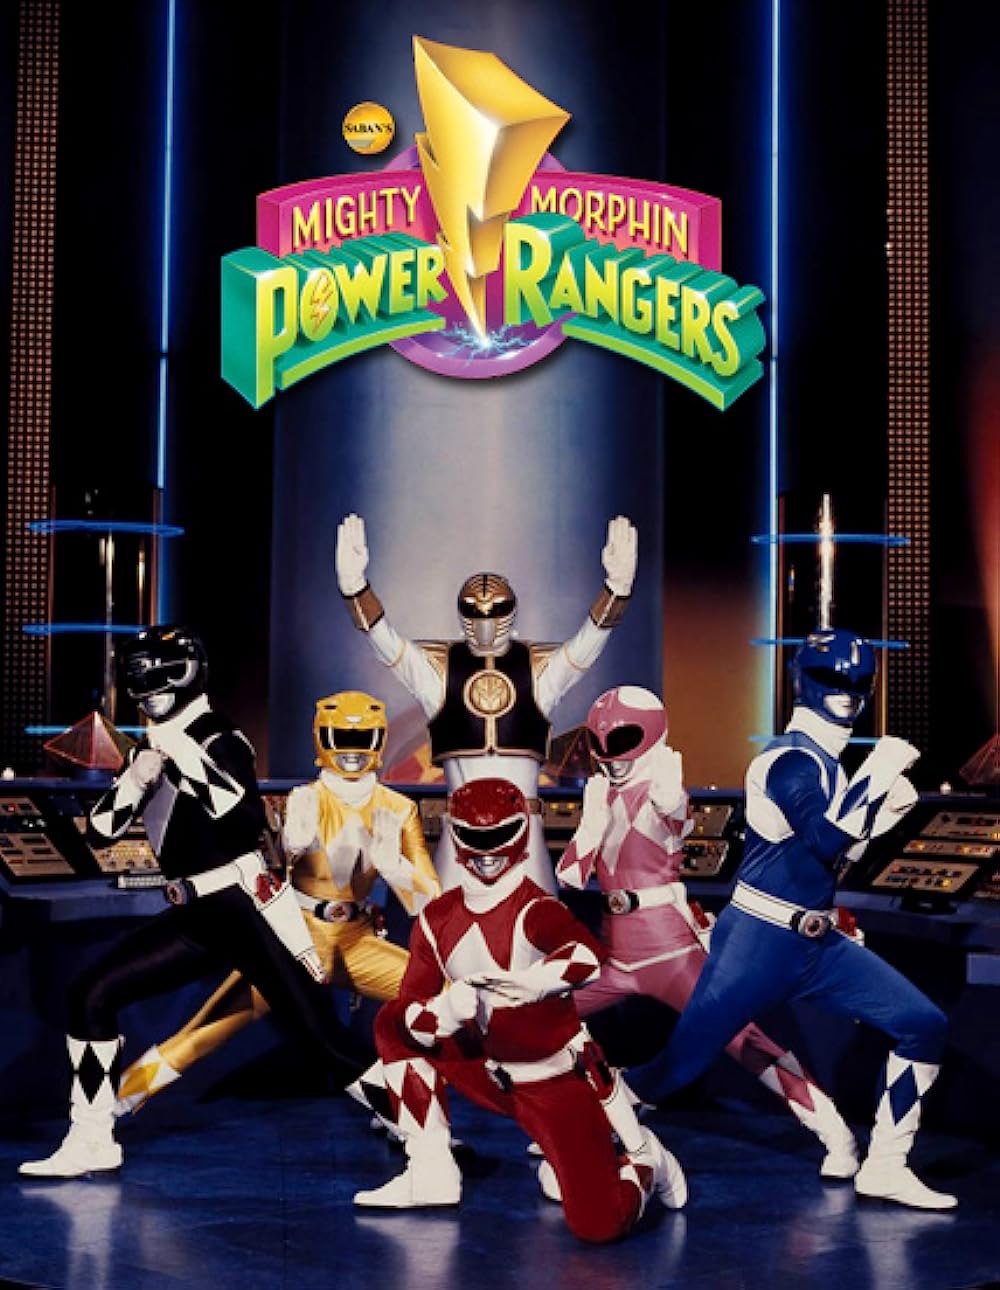 Top Power Rangers Songs (30th Anniversary special:)